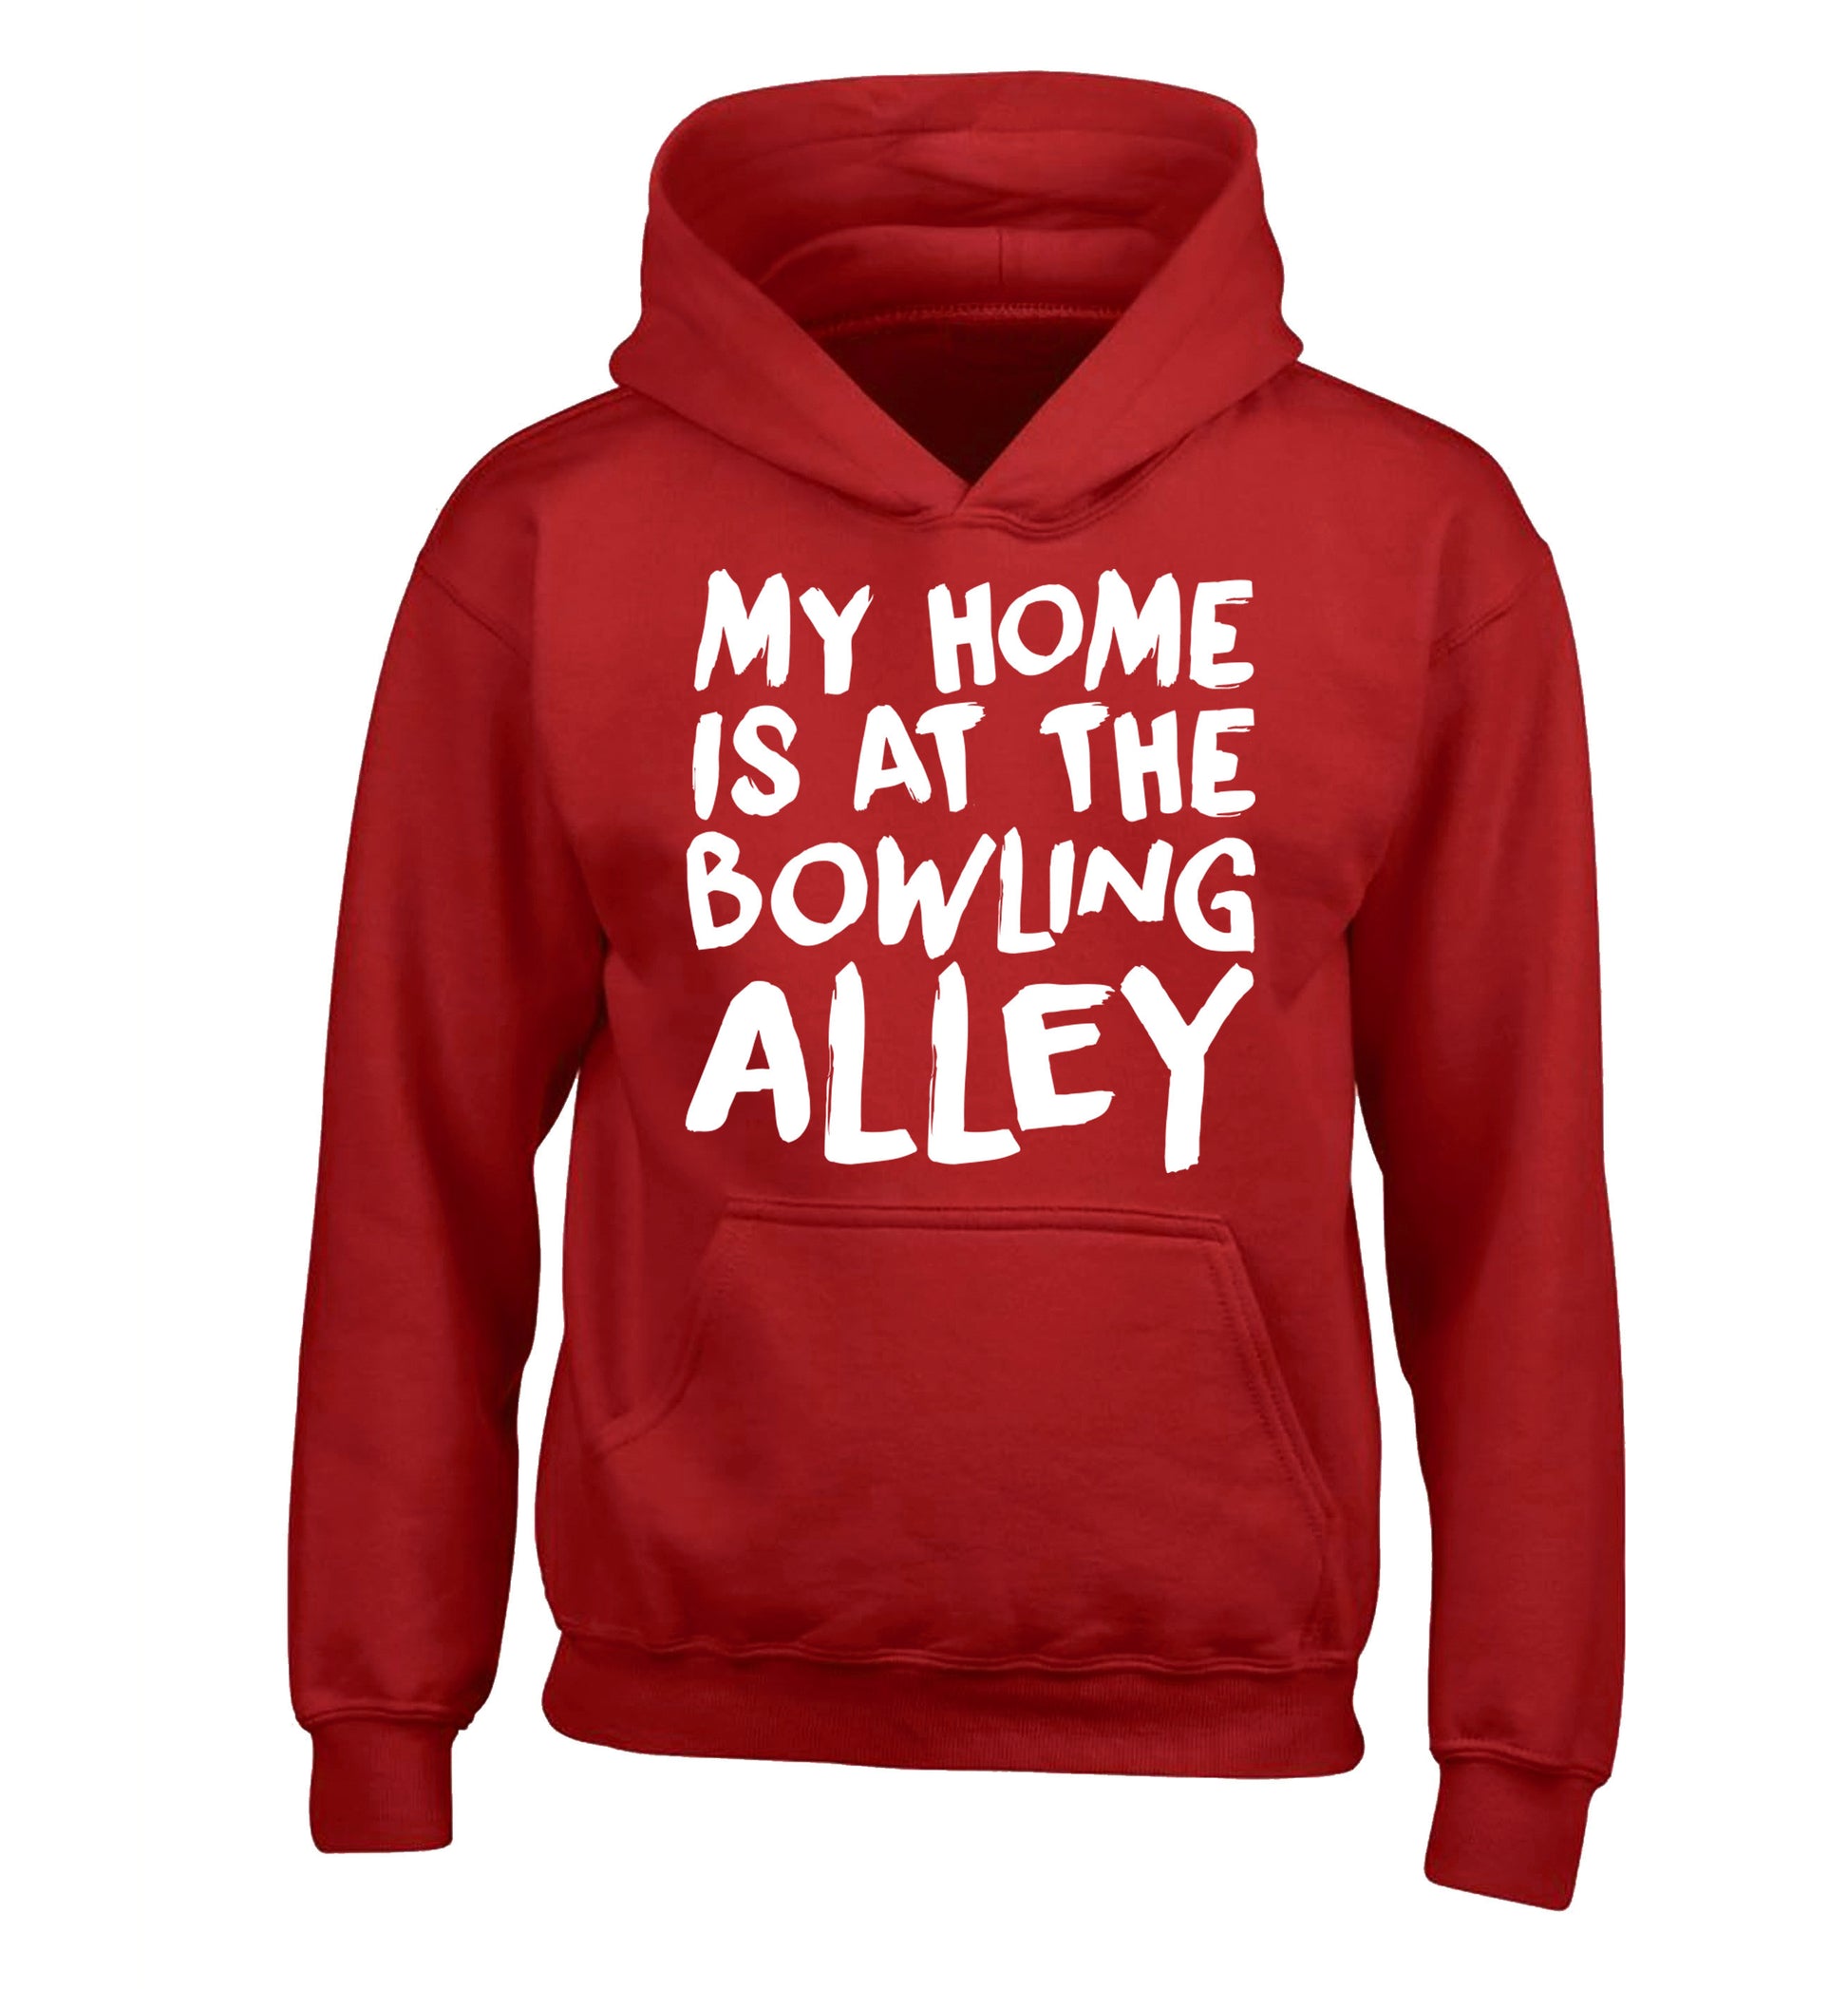 My home is at the bowling alley children's red hoodie 12-14 Years